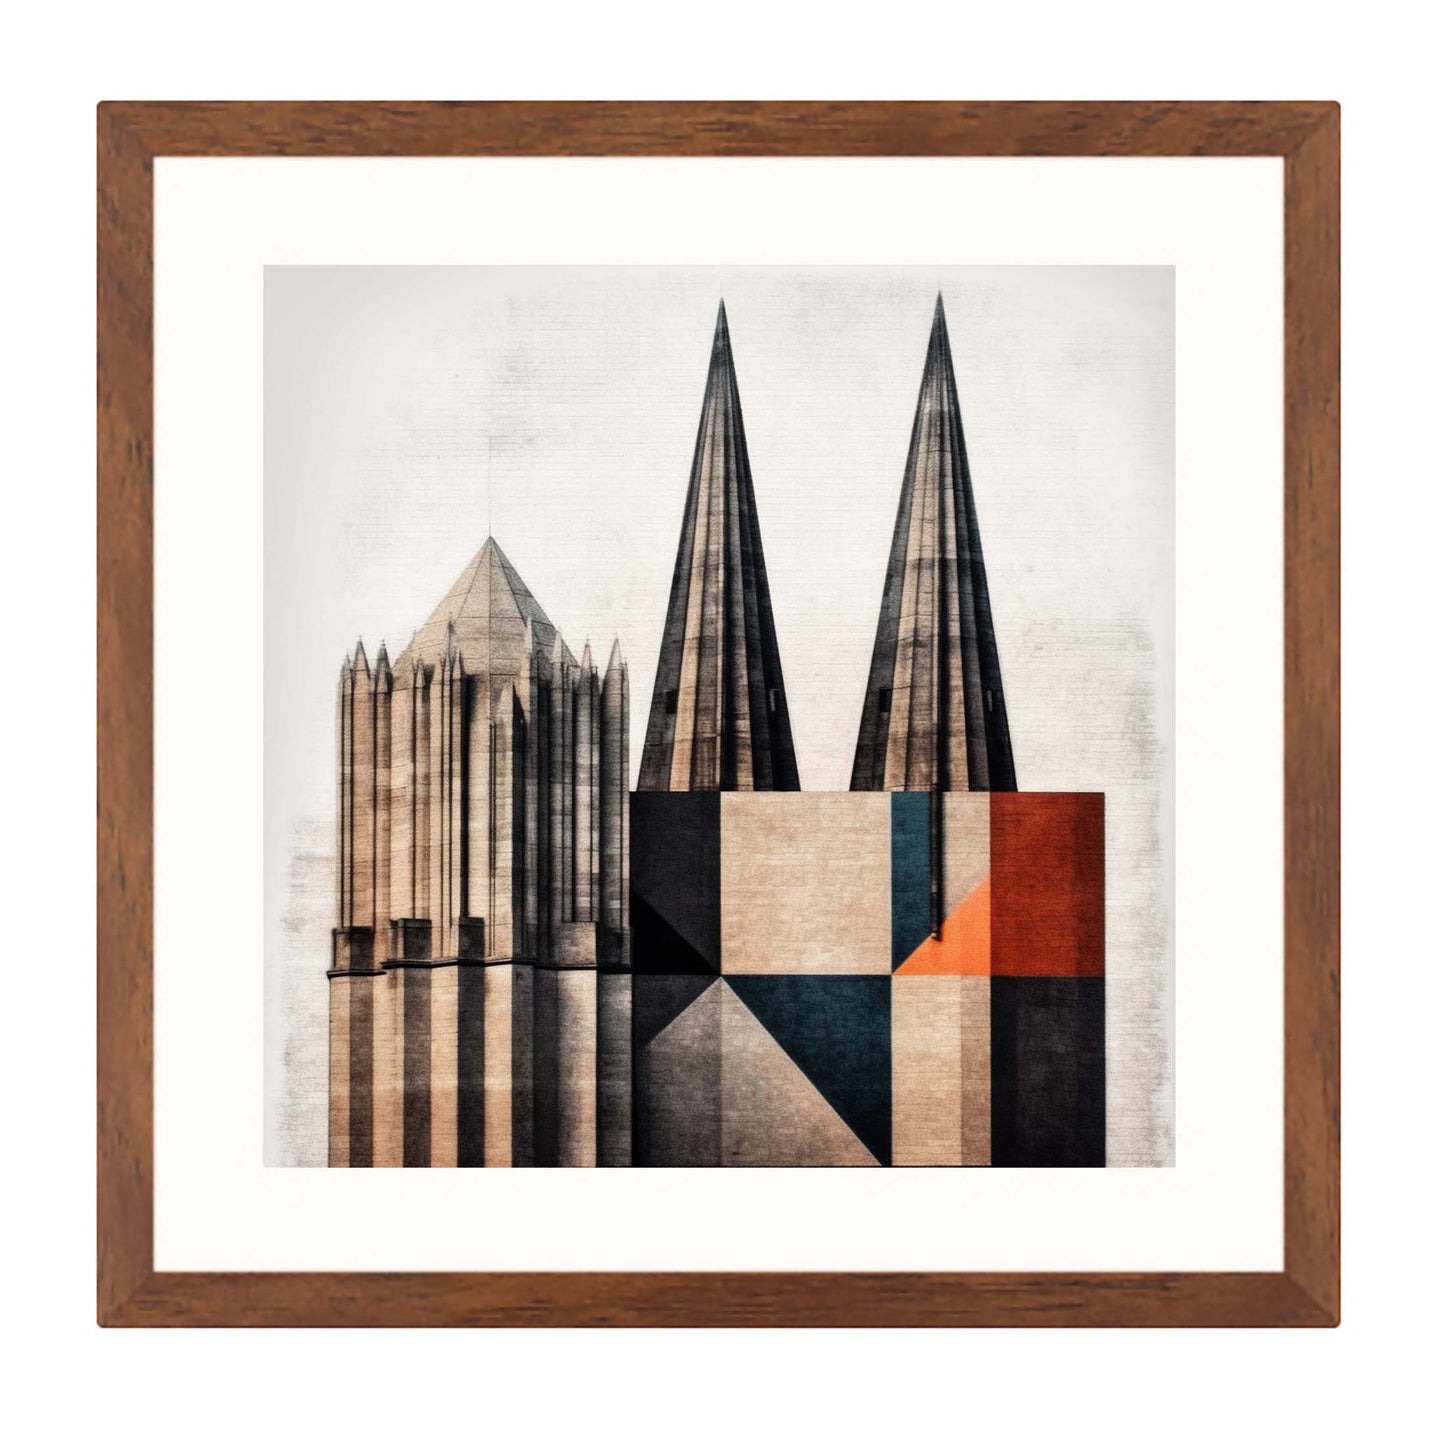 Cologne Cathedral - mural in the style of minimalism